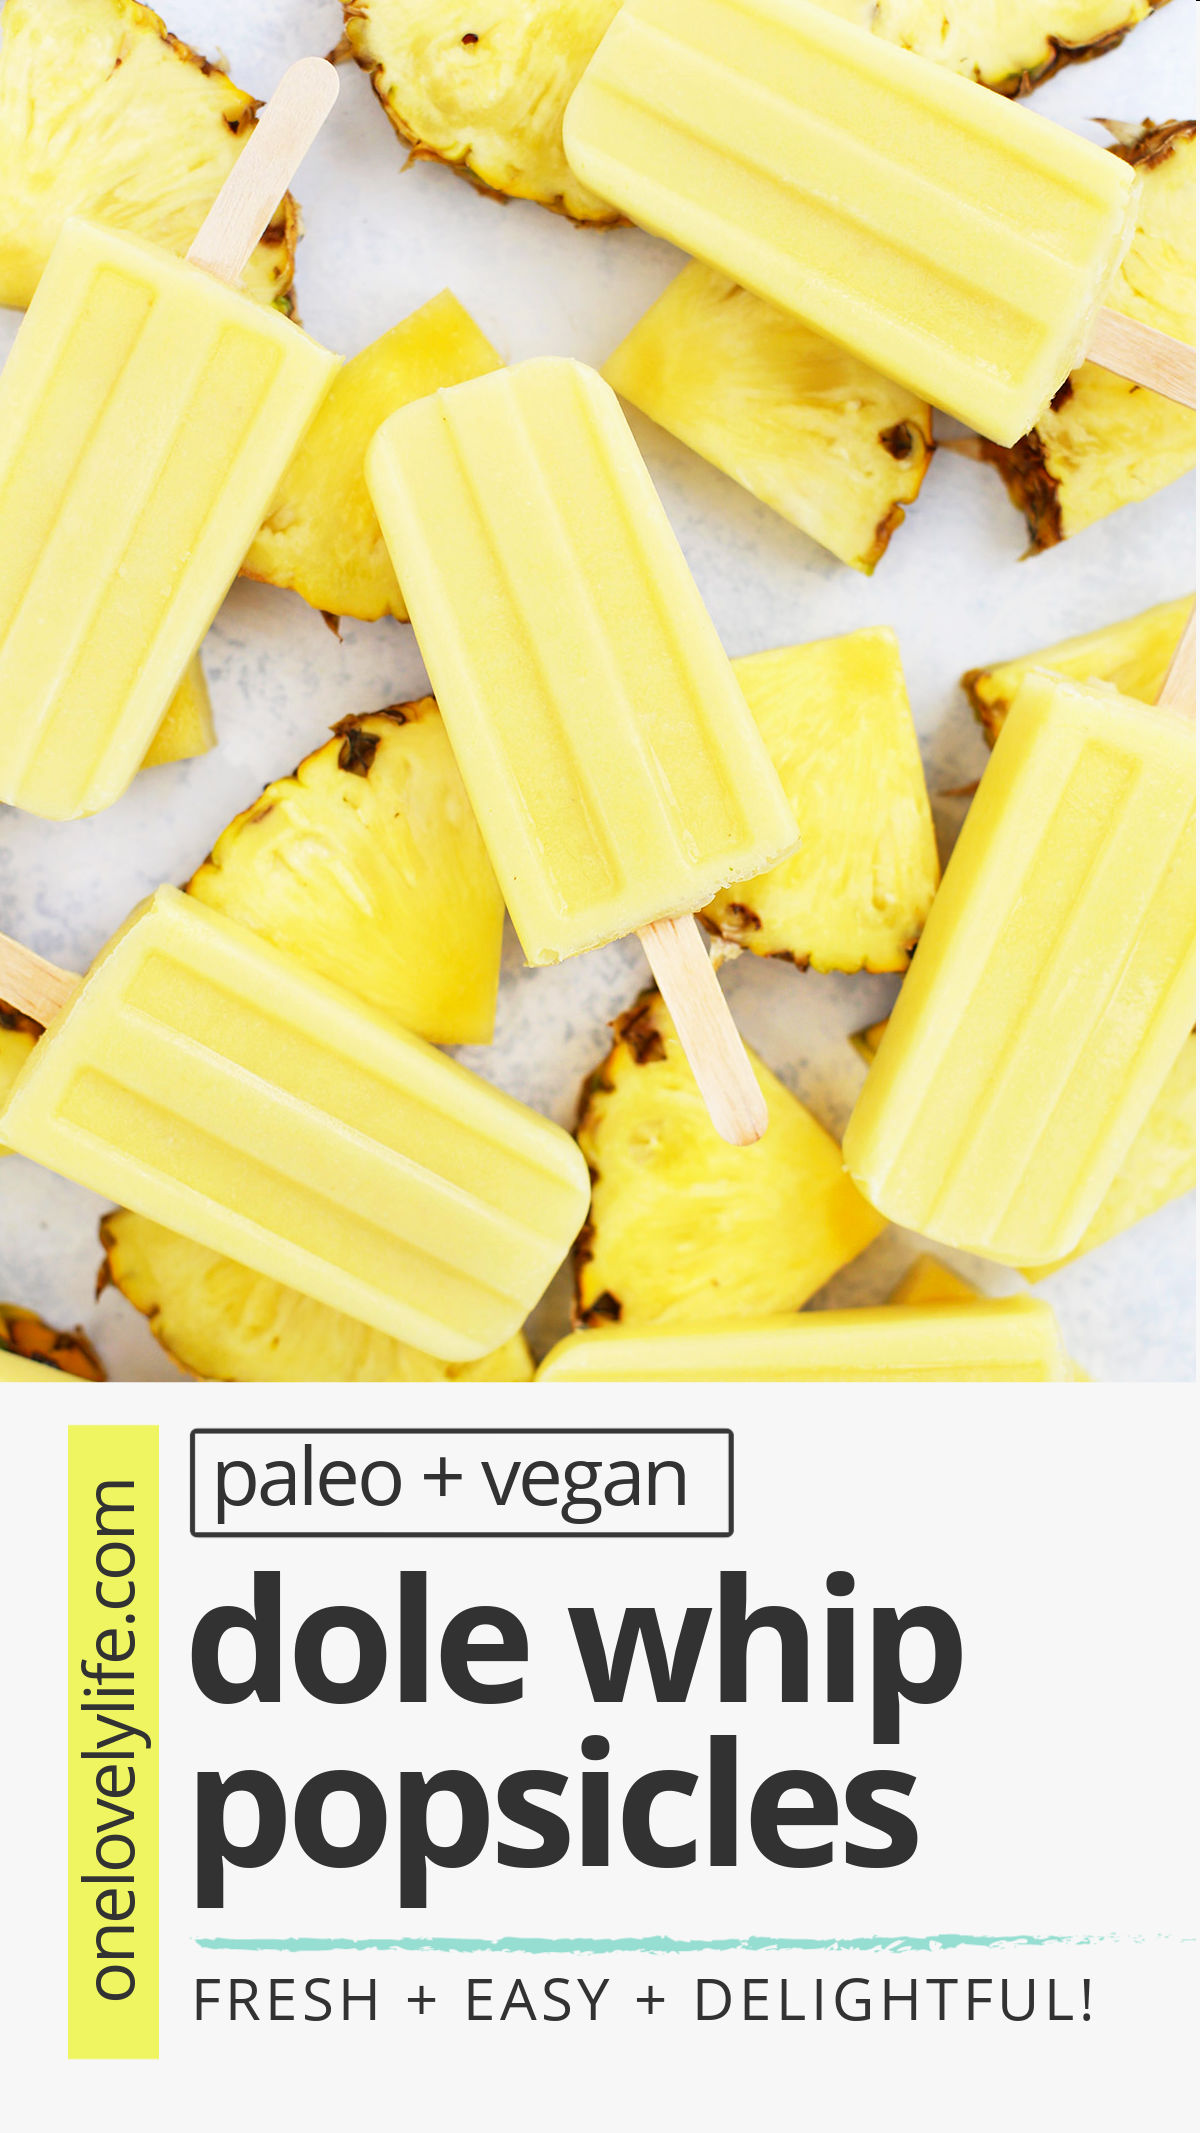 Vegan & Paleo DOLE WHIP Popsicles - 3 ingredients, naturally sweetened, and SO GOOD! These pineapple popsicles taste like a Disney Dole Whip! // #paleo #vegnan #refinedsugarfree #popsicles #homemadepopsicles #dolewhip #pineapple